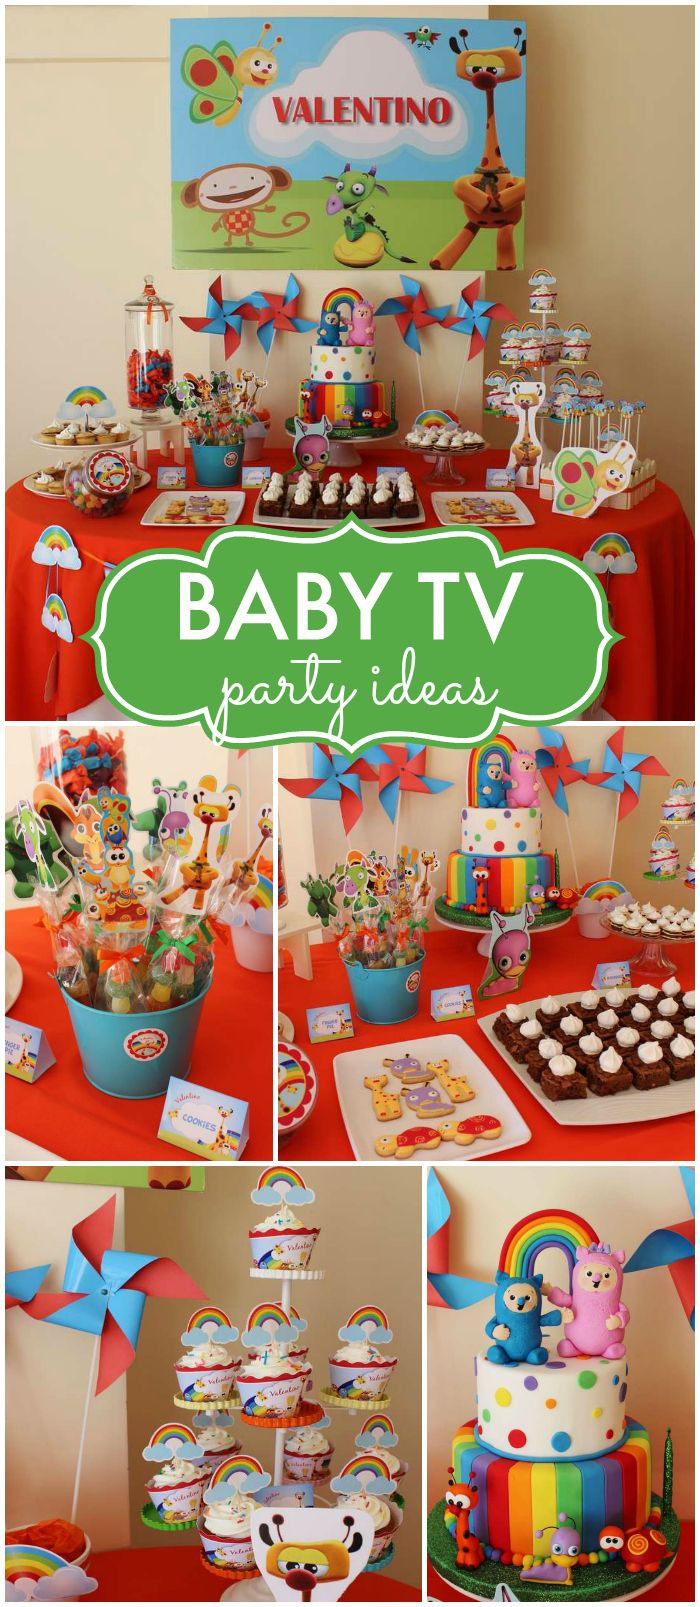 Baby First Tv Party Decorations
 How fun is this Baby TV party So colorful See more